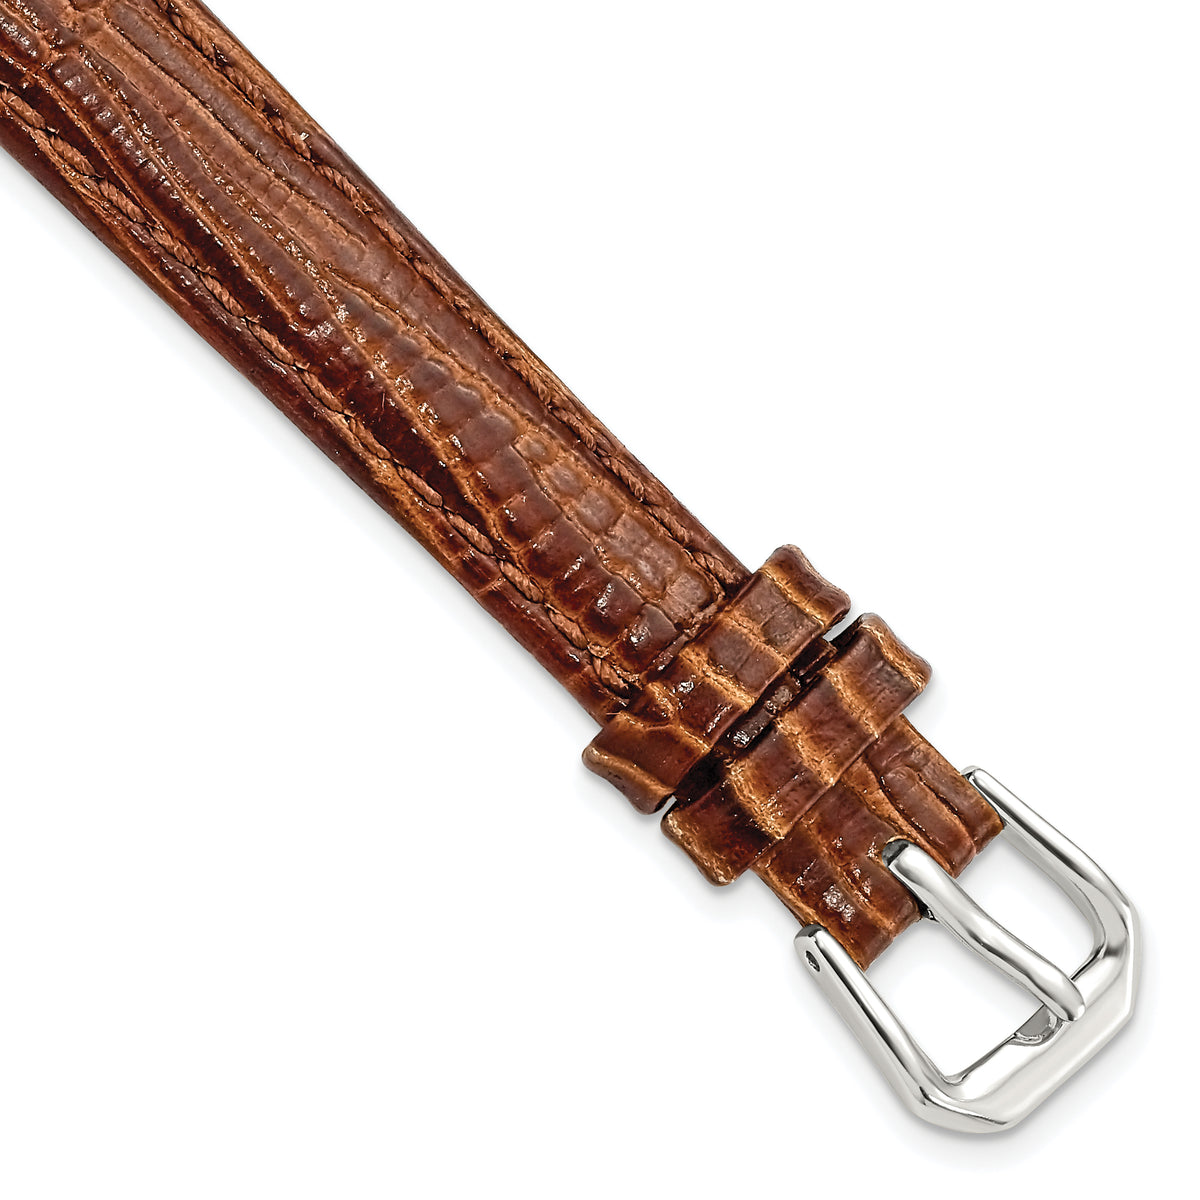 DeBeer 12mm Havana Brown Snake Grain Leather with Silver-tone Buckle 6.75 inch Watch Band